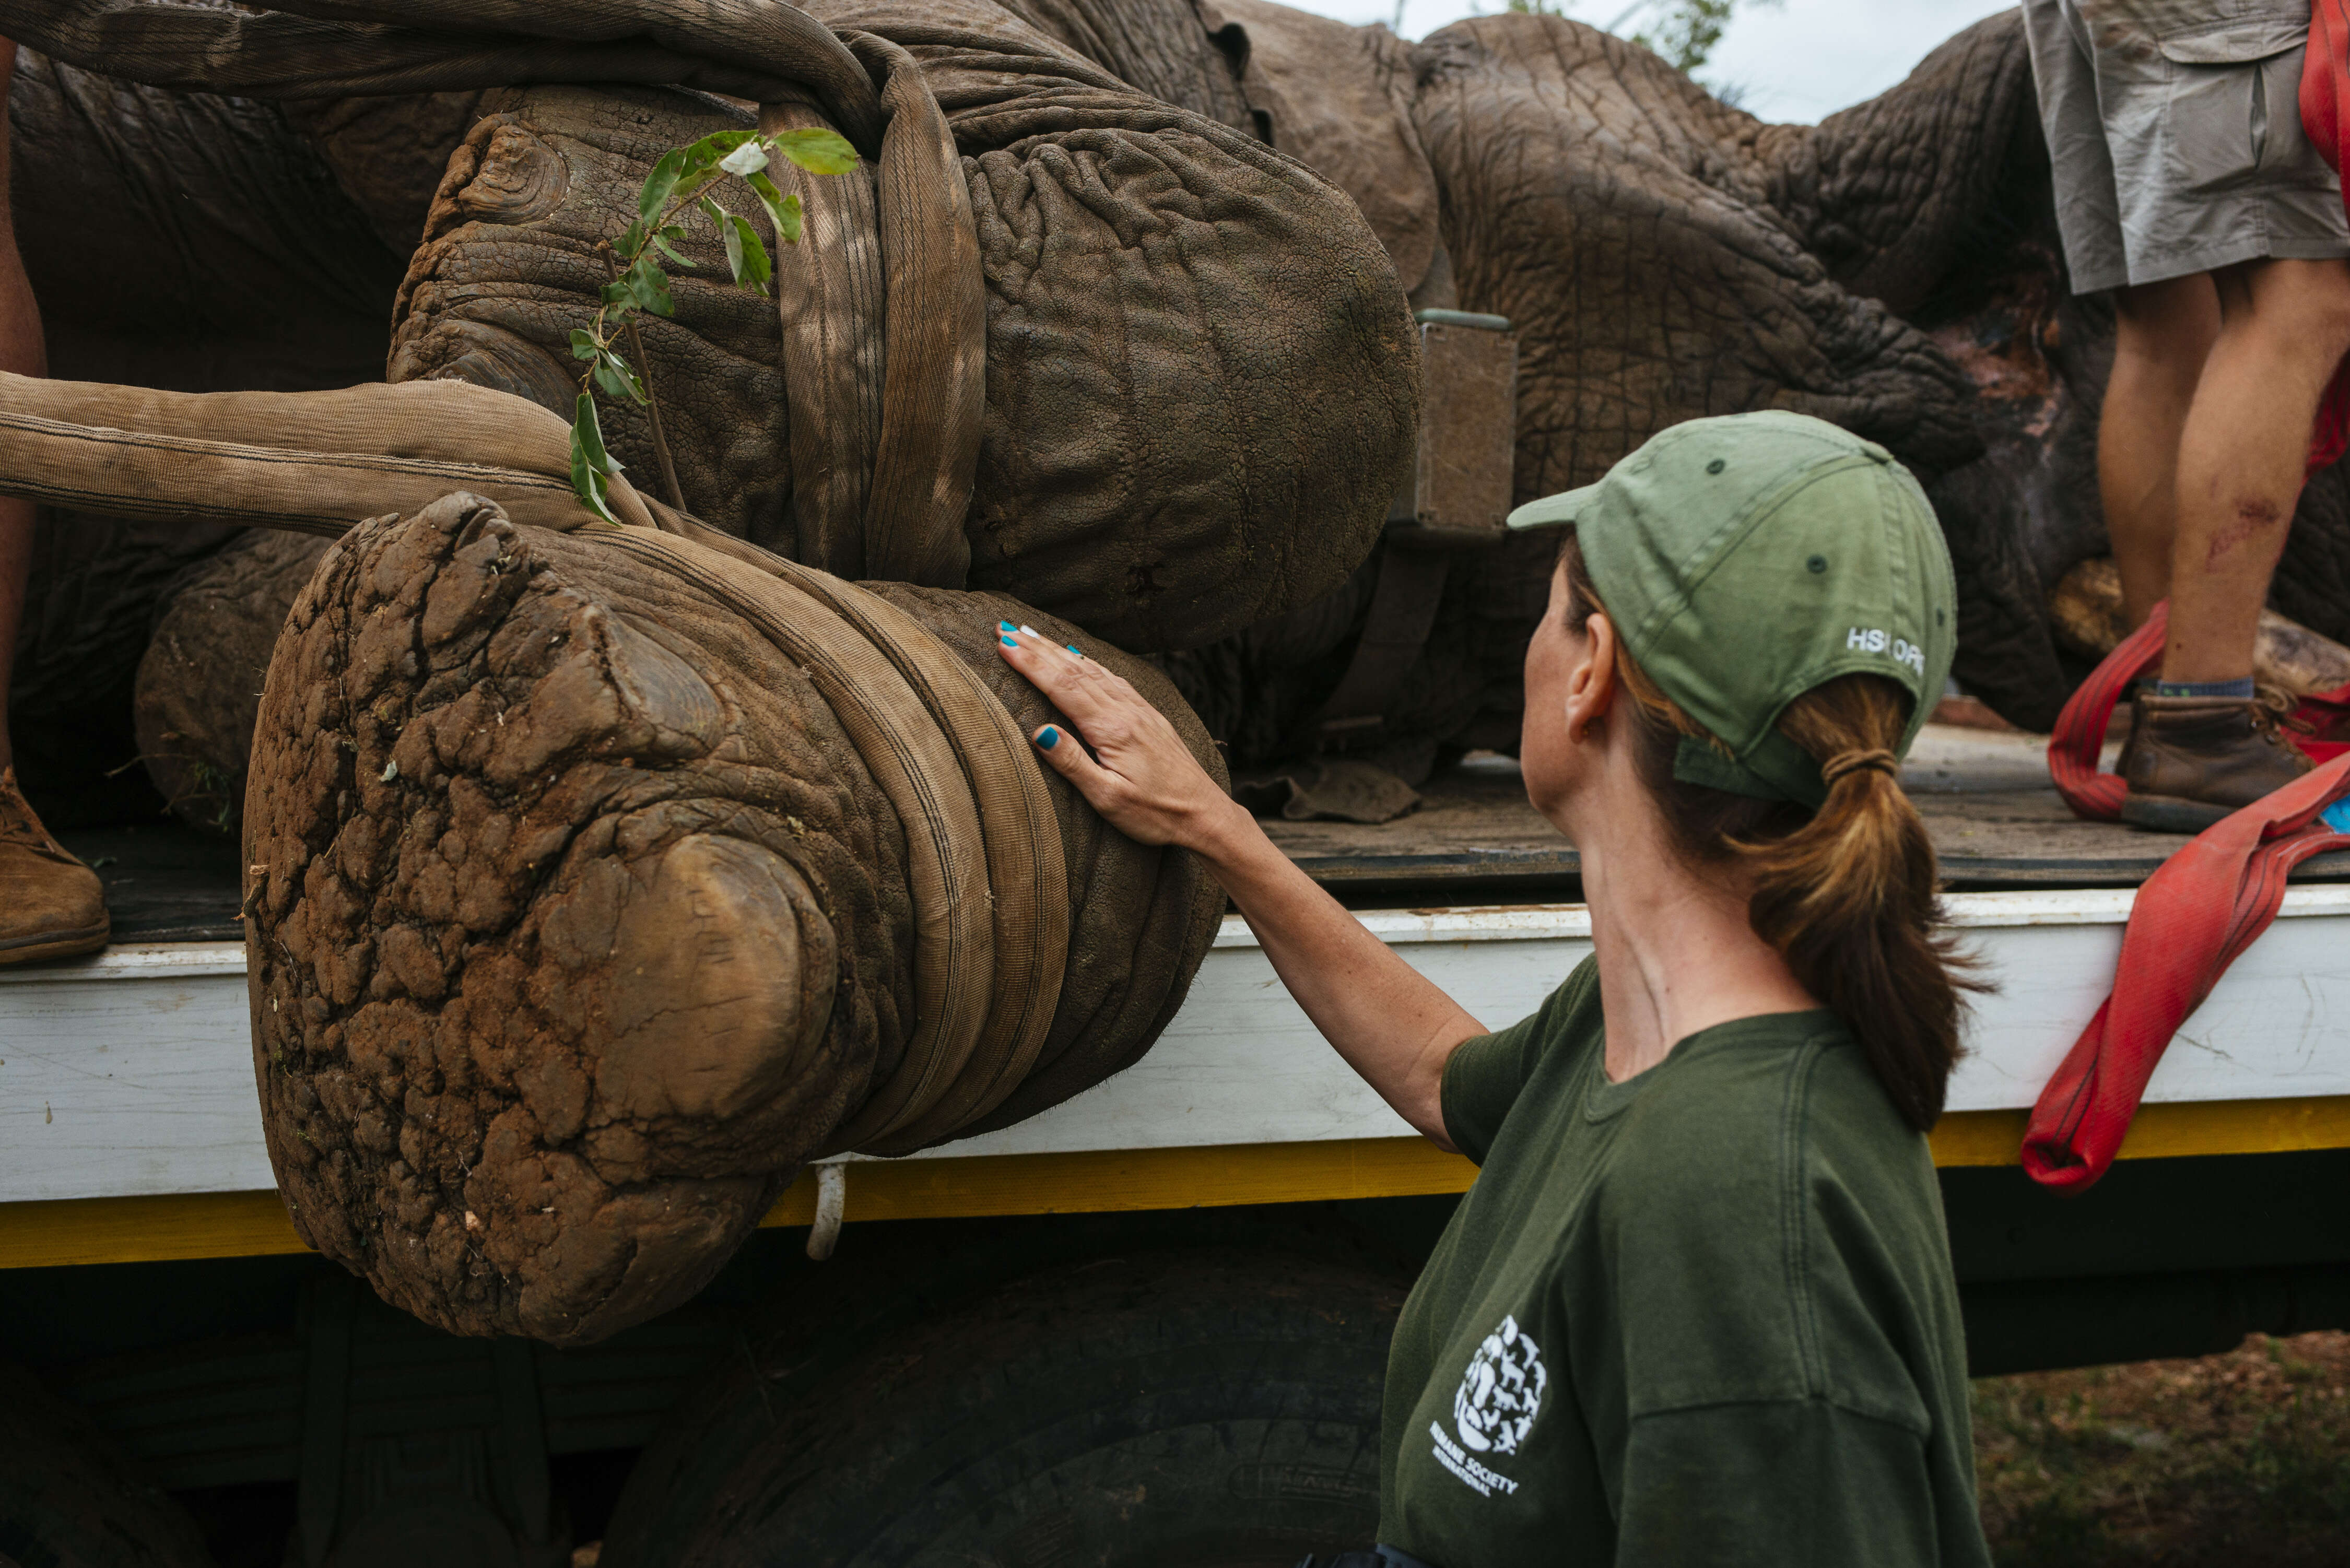 Elephant being relocated by rescue team